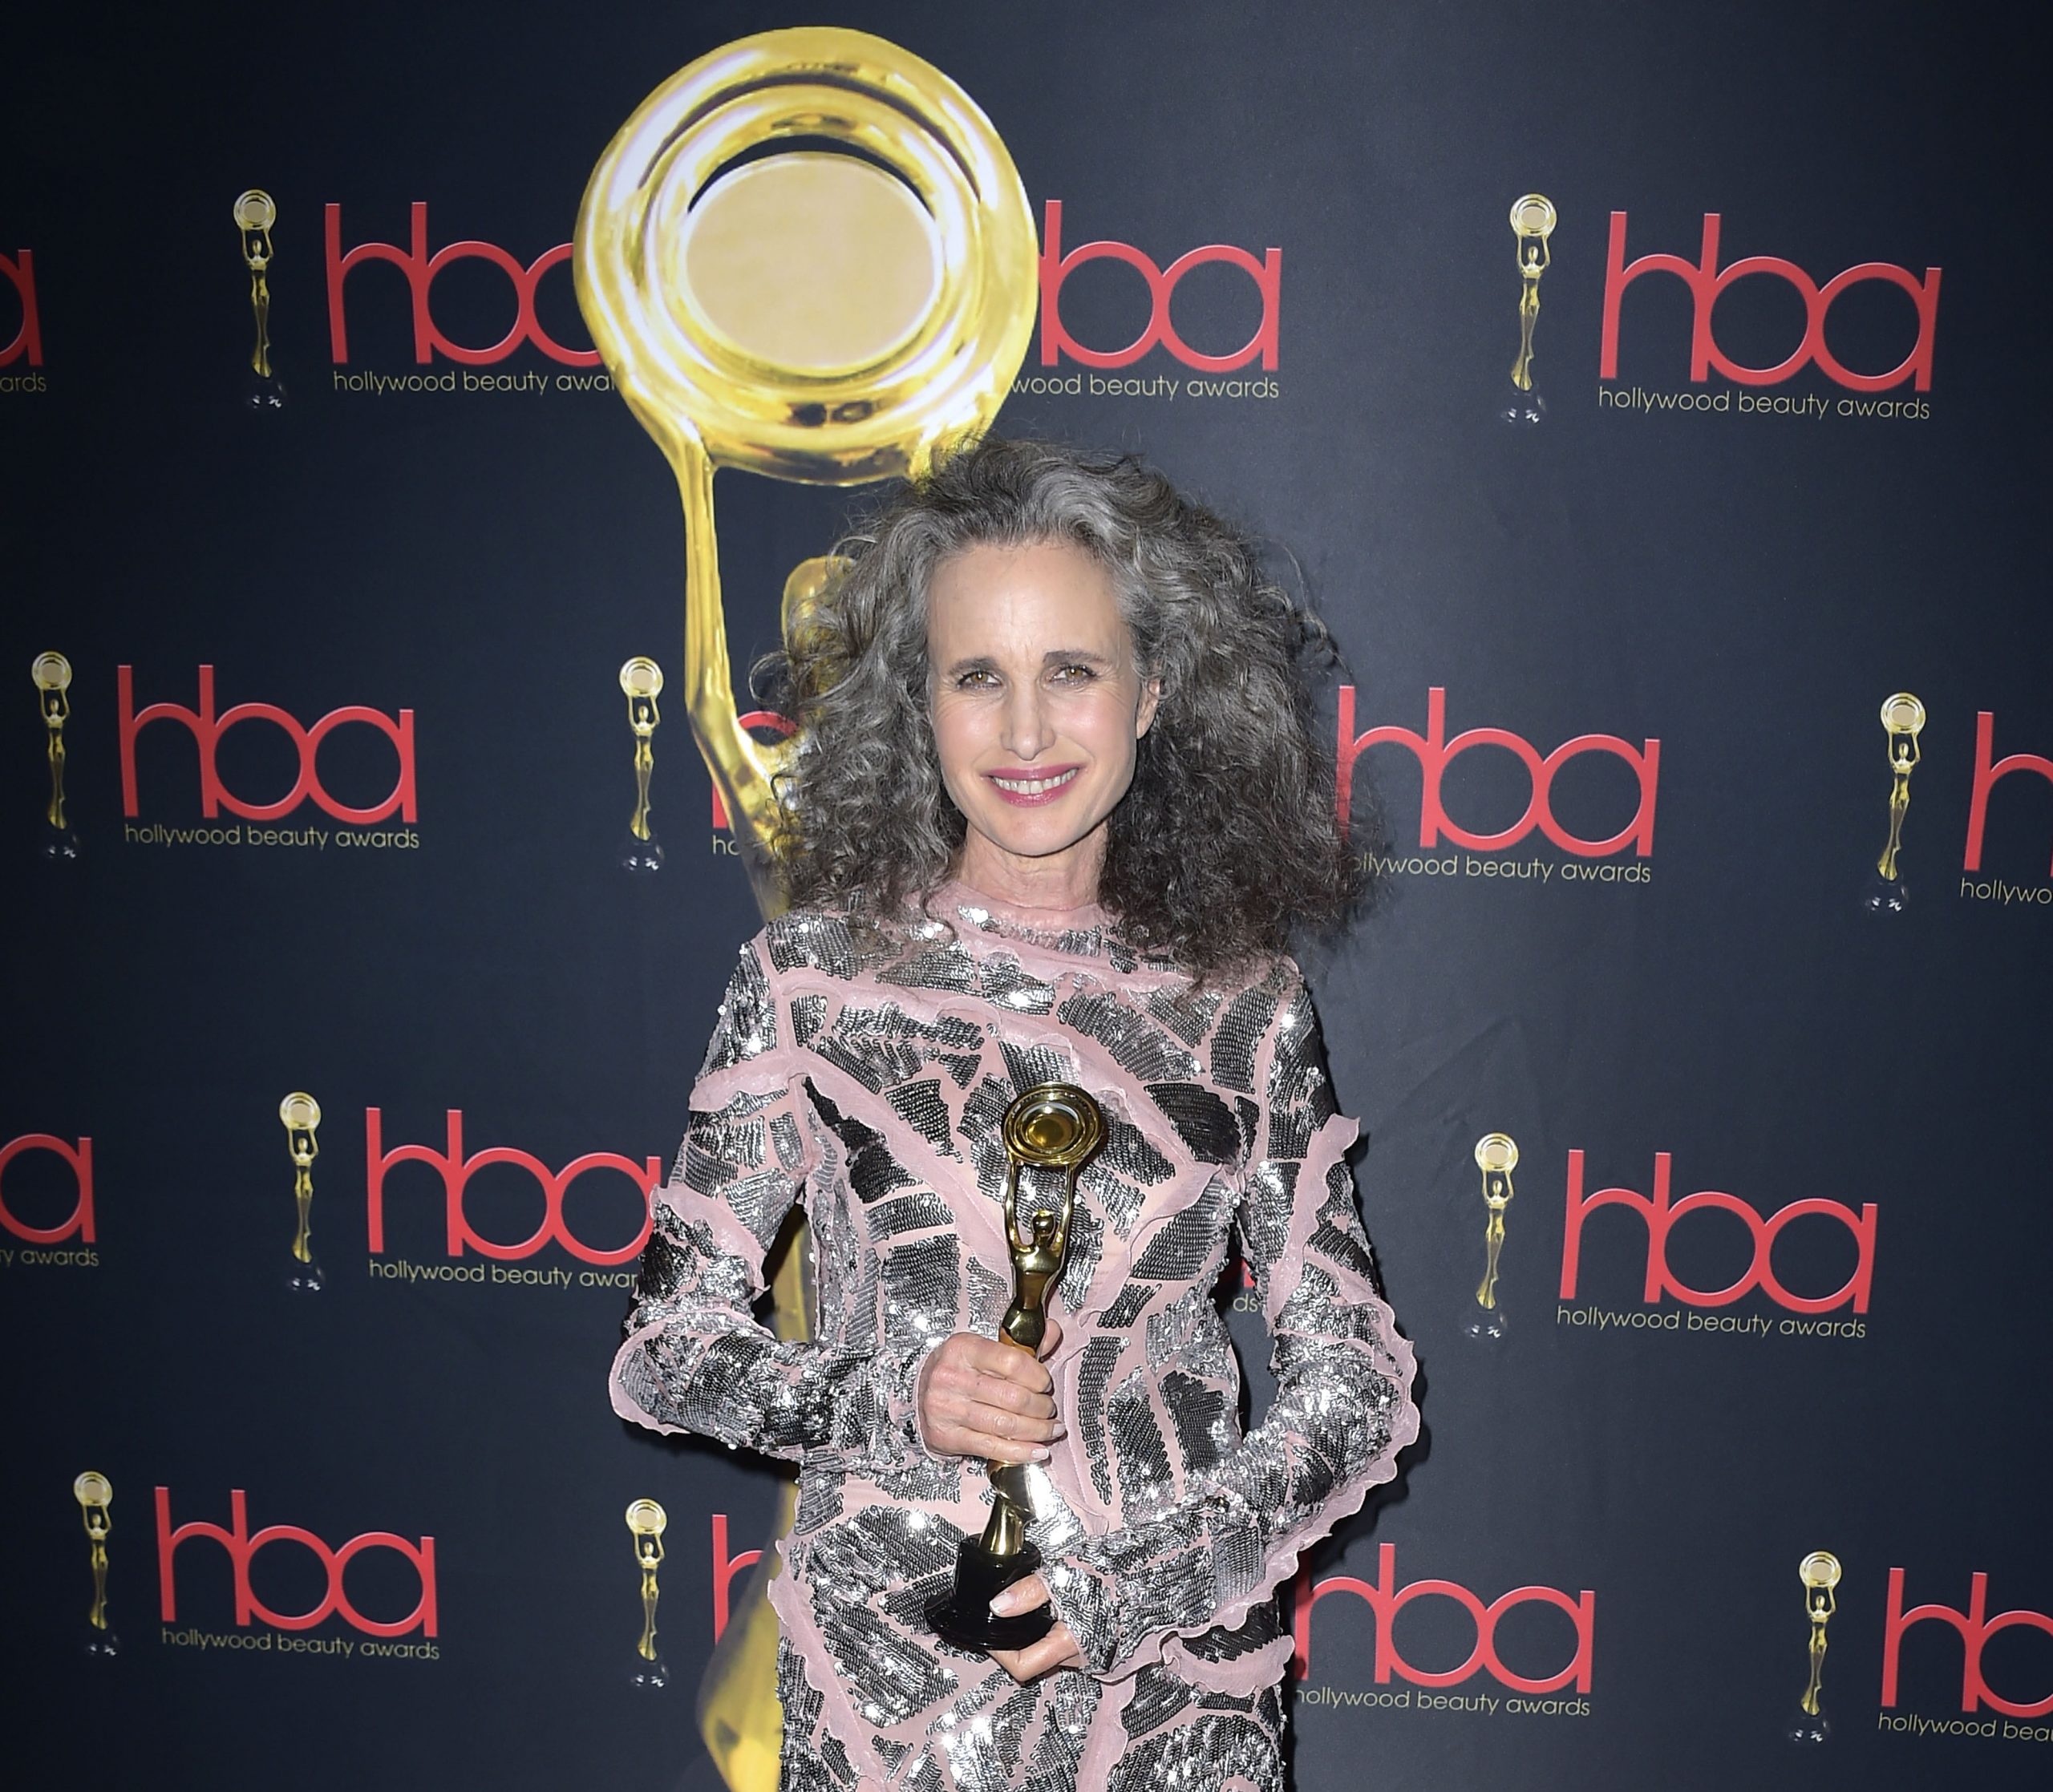 andie macdowell, timeless beauty award, hollywood beauty awards, rainey qualley